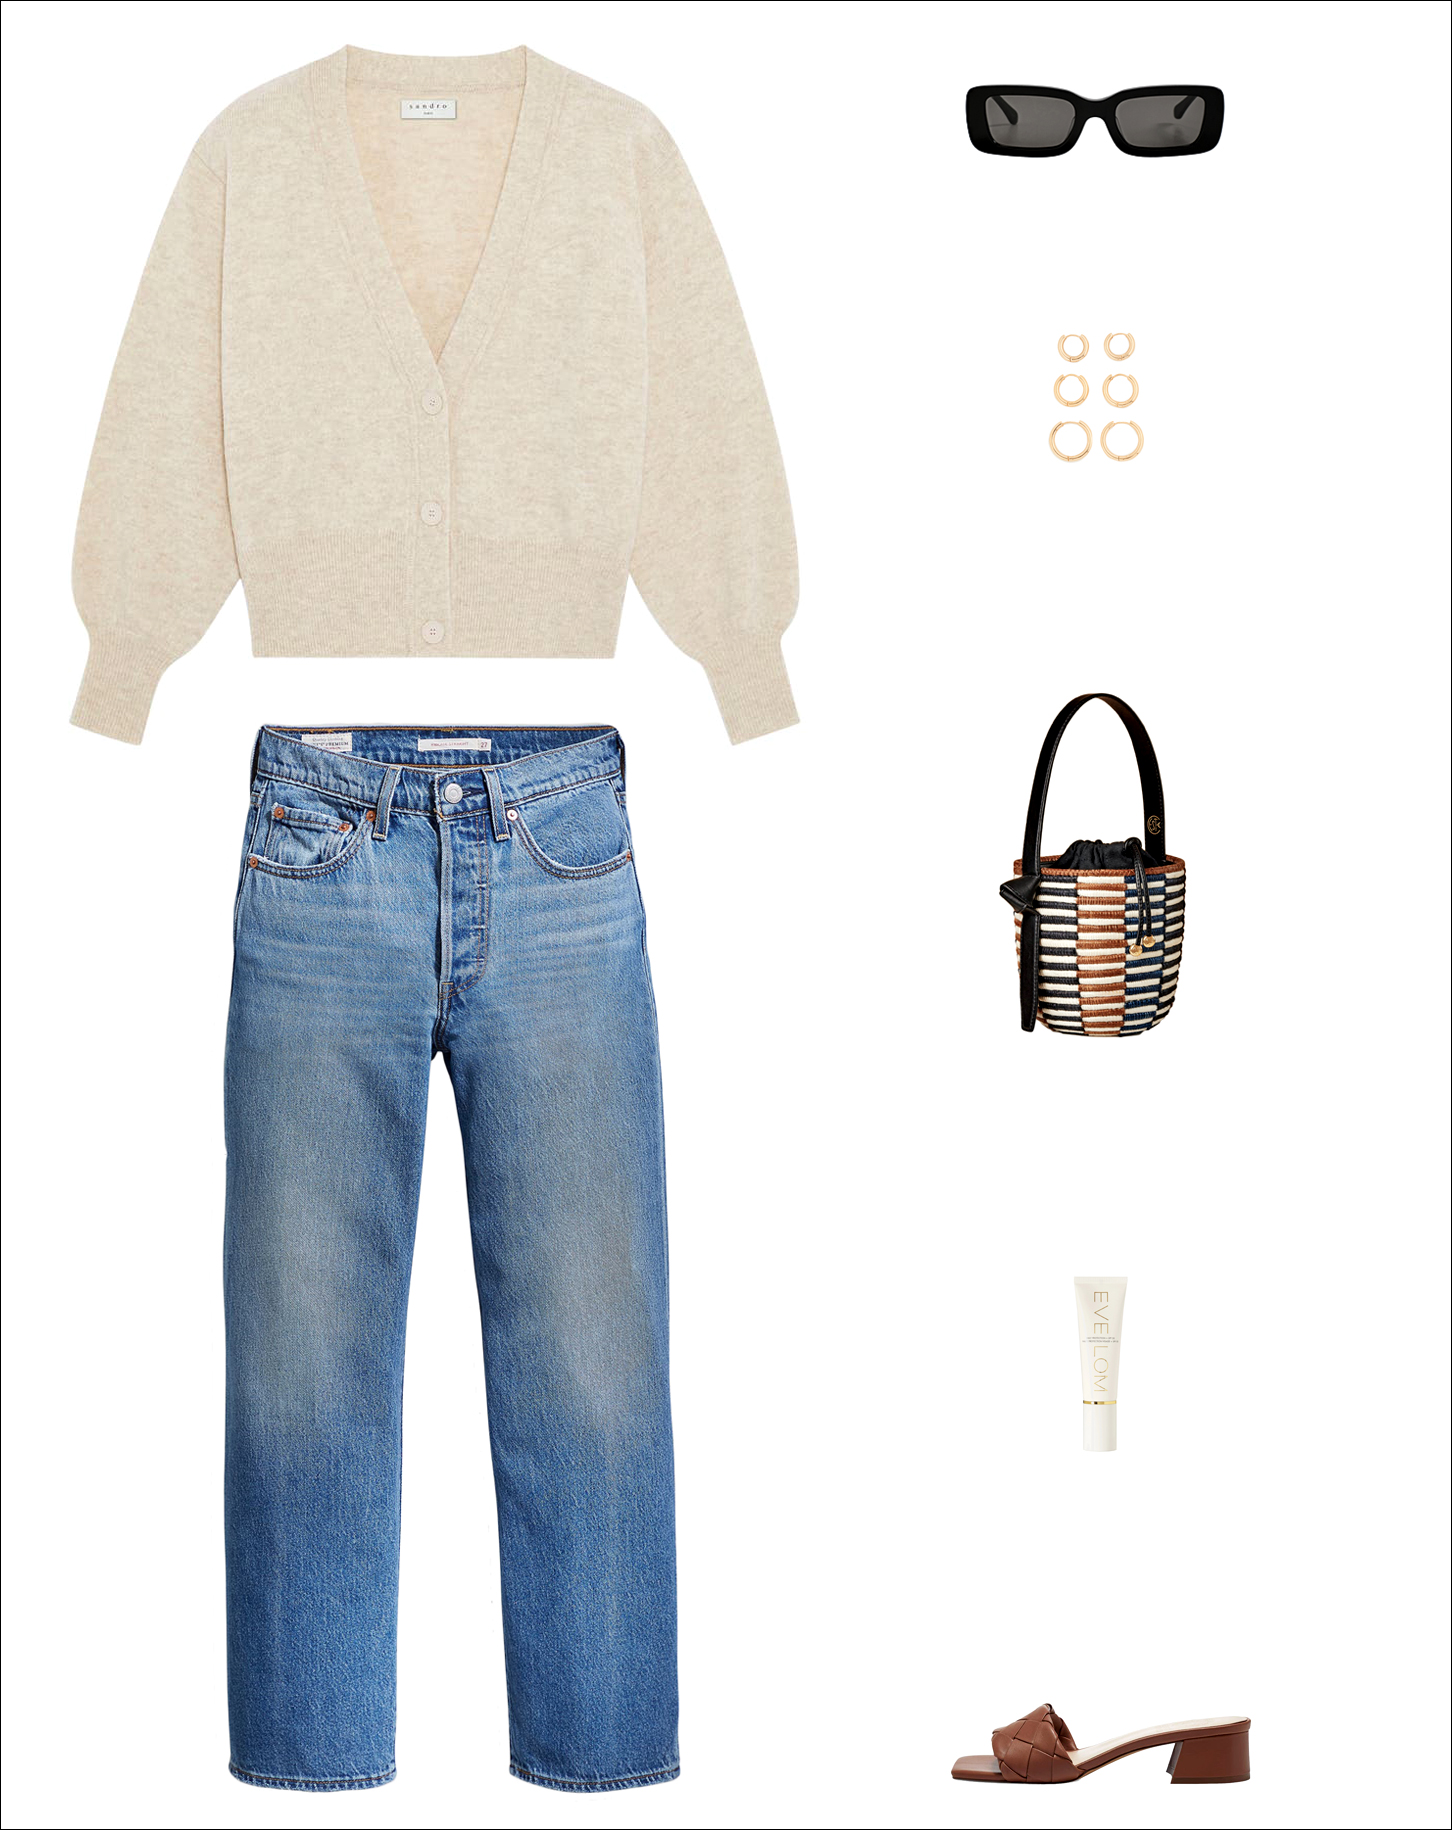 A Stylish Cardigan and Denim Outfit to Carry You Through Spring